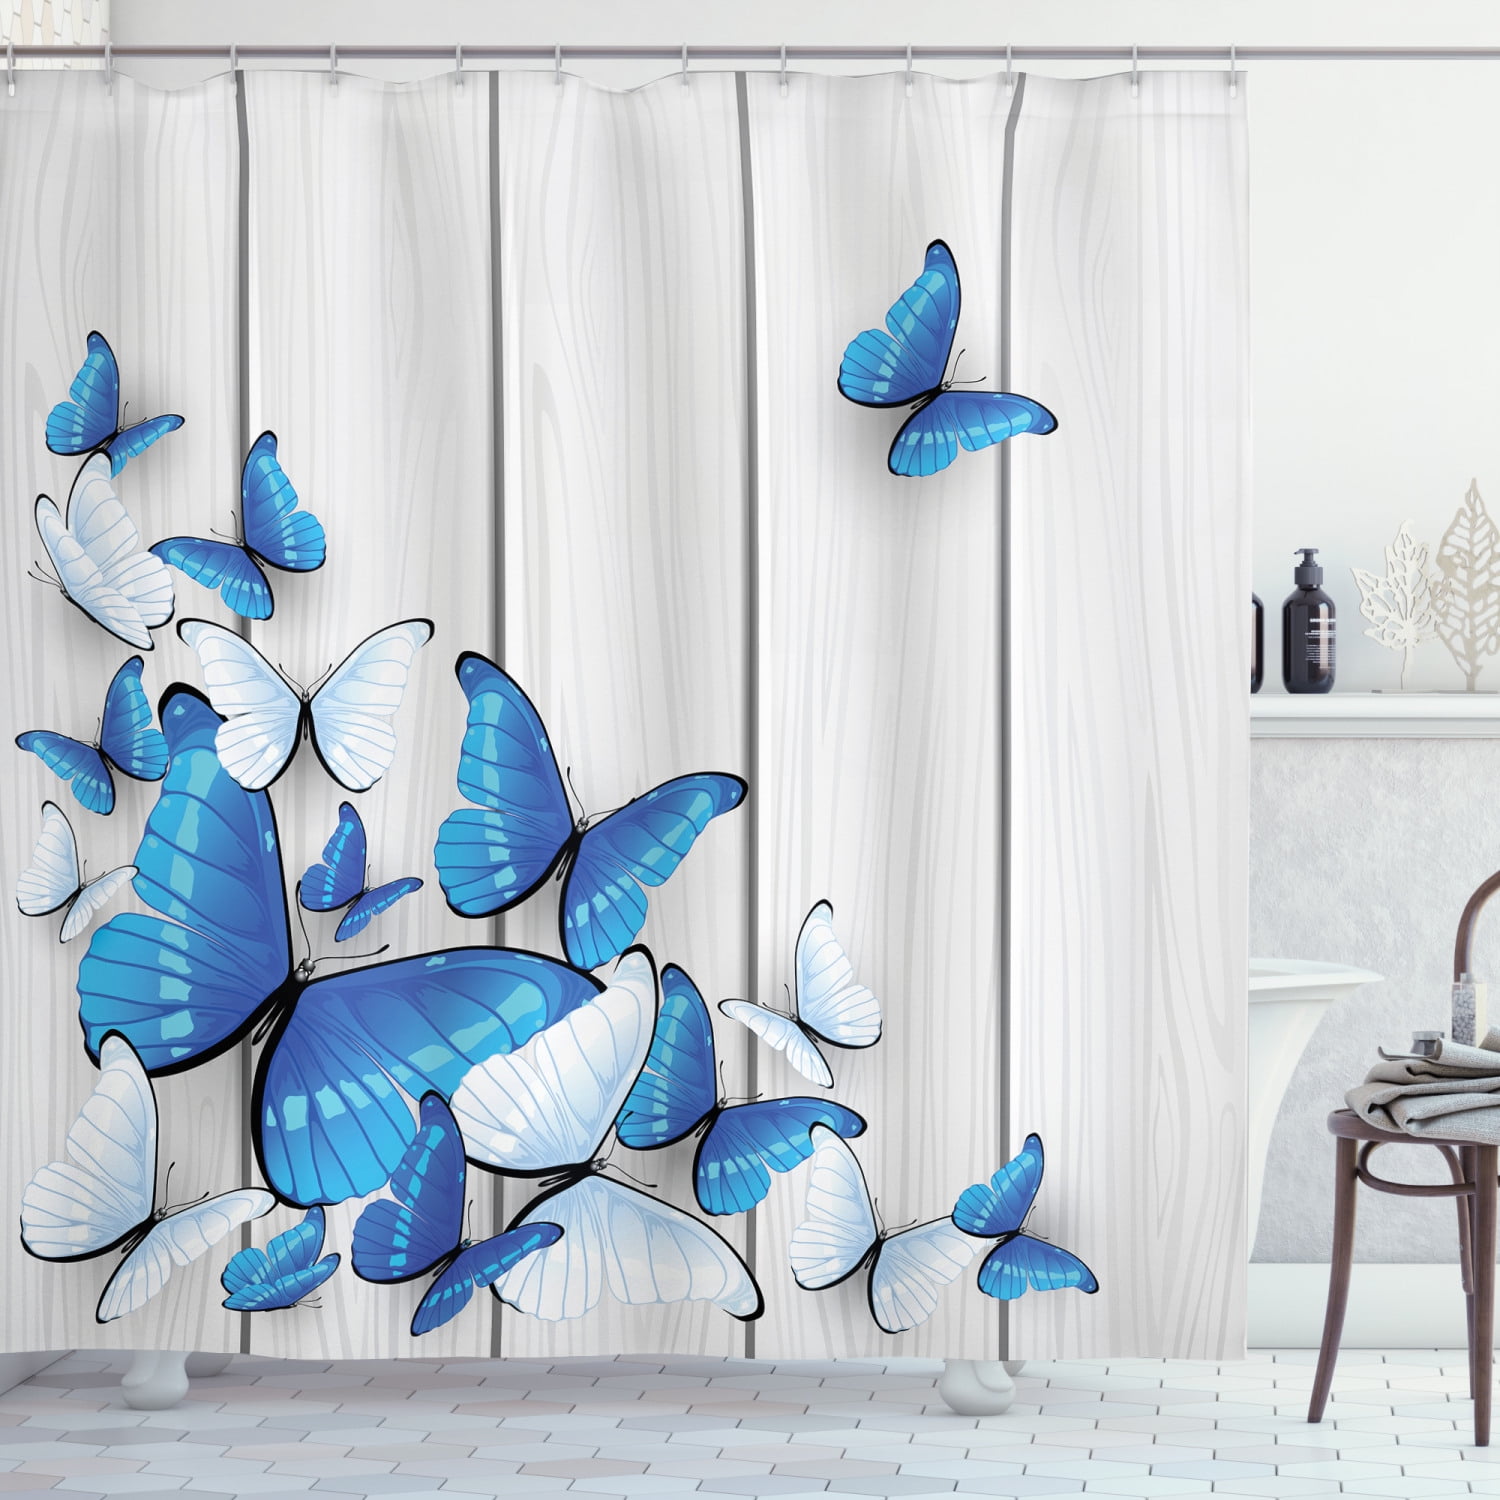 Butterfly Silhouettes 3D Shower Curtain Waterproof Fabric Bathroom Decoration 